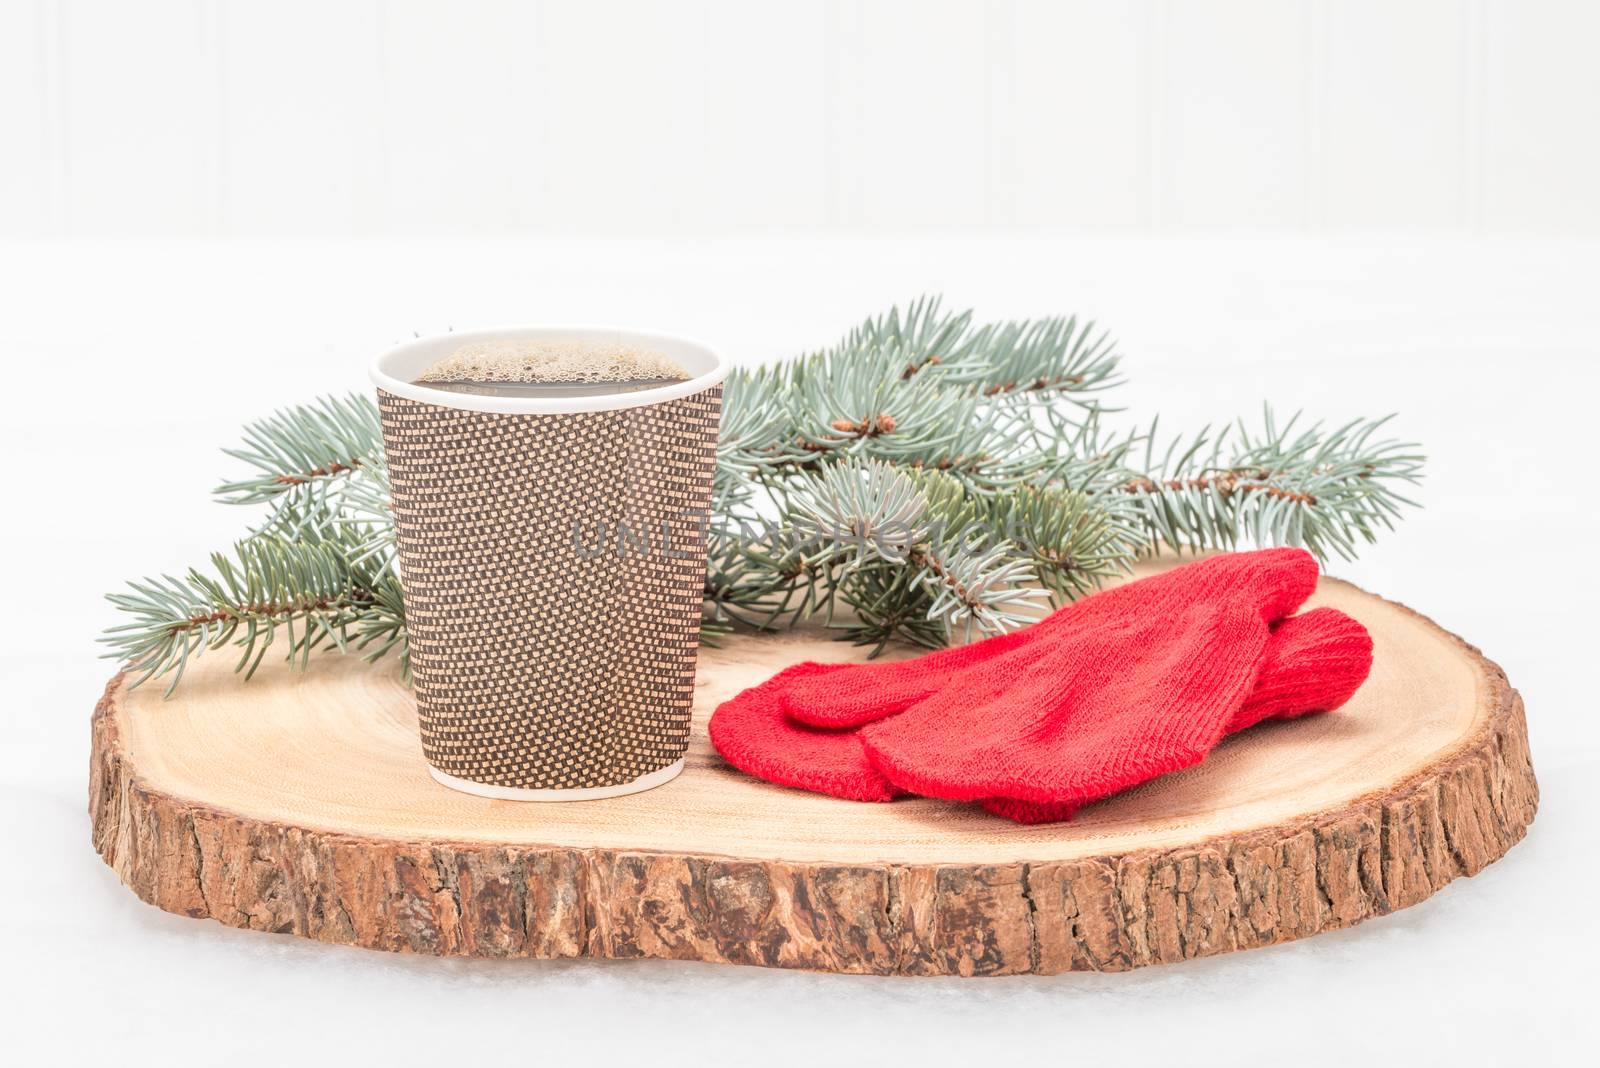 Cup of fresh hot coffee set near spruce branched and red gloves.